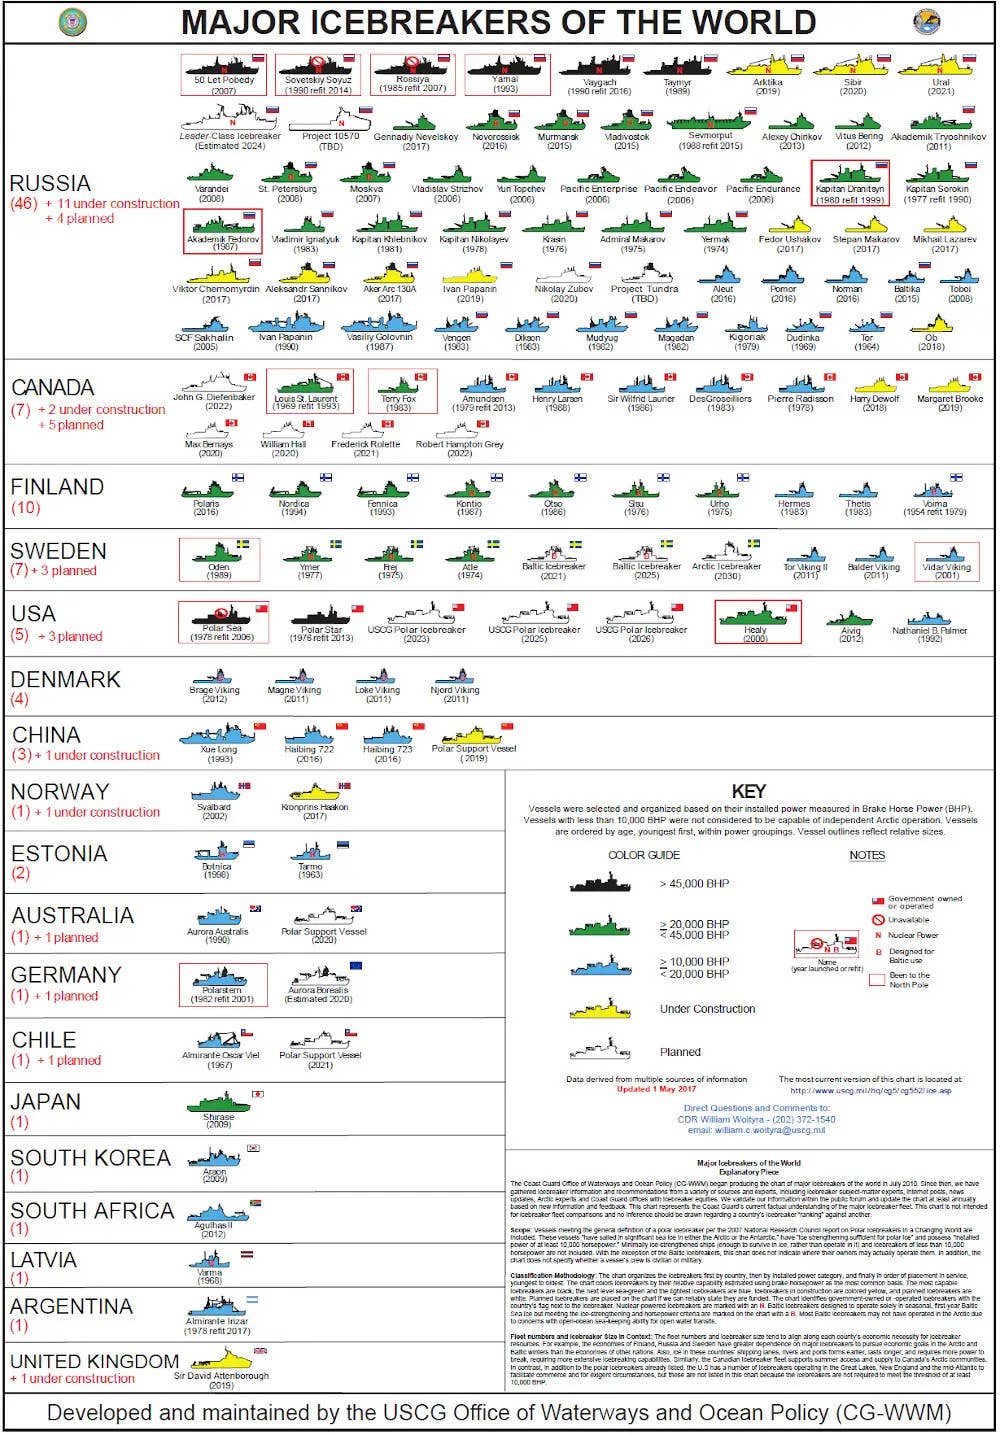 A breakdown of major icebreakers in service, under construction, or otherwise in planning around the world, as of 2017. Though dated, this graphic still gives a good sense of the immense disparity between the size of Russia's icebreaker fleets and those of the rest of the world. <em>USCG </em>